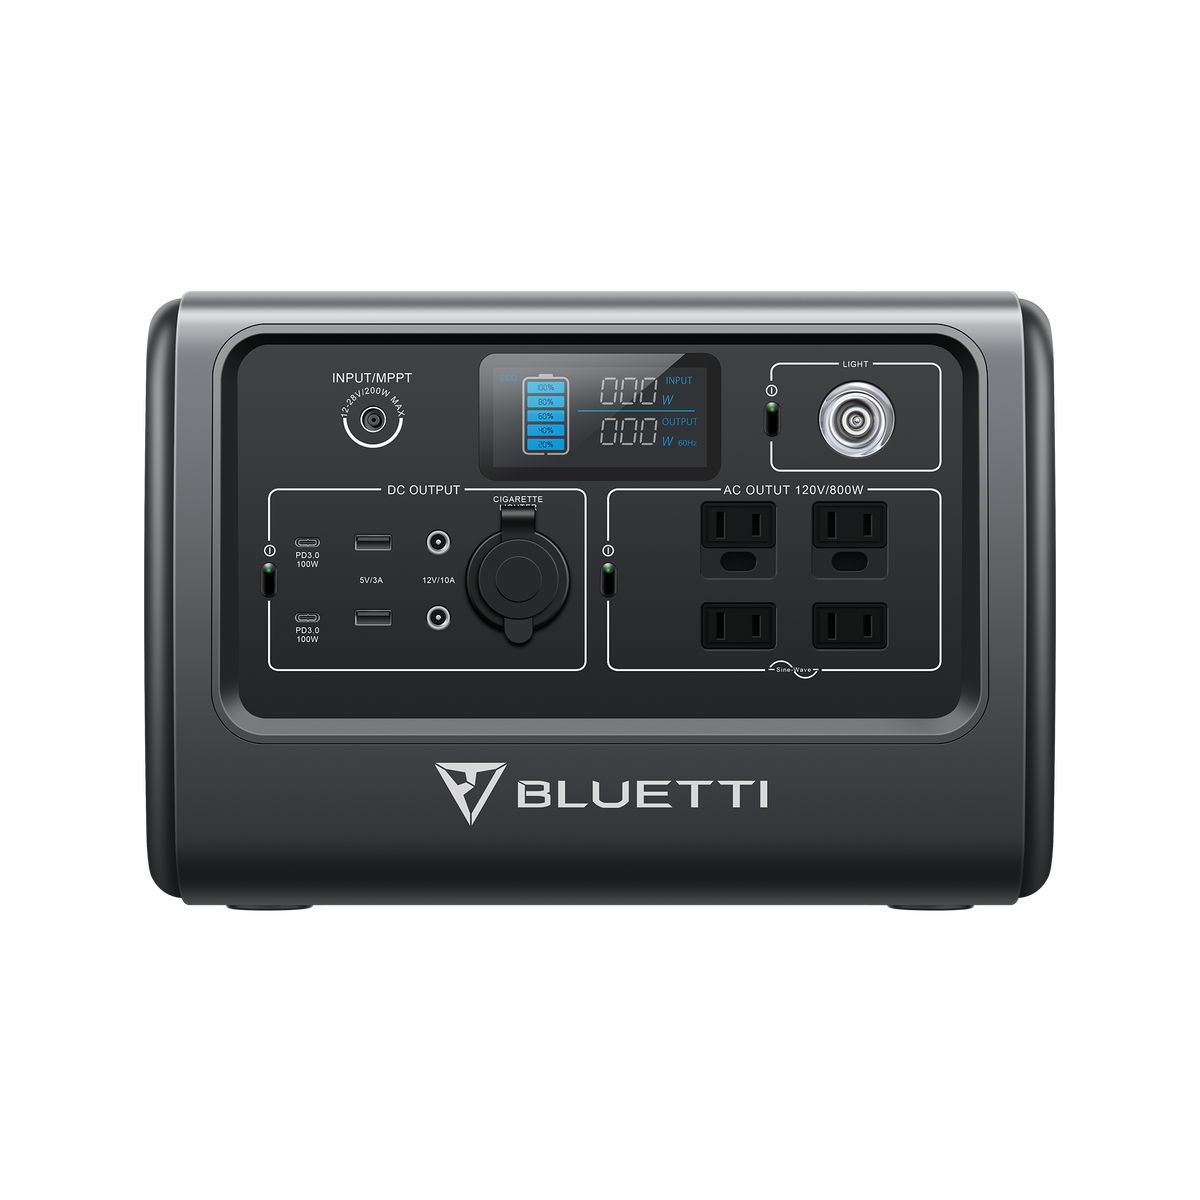 The BLUETTI EB70 Power Station Is Small But Powerful